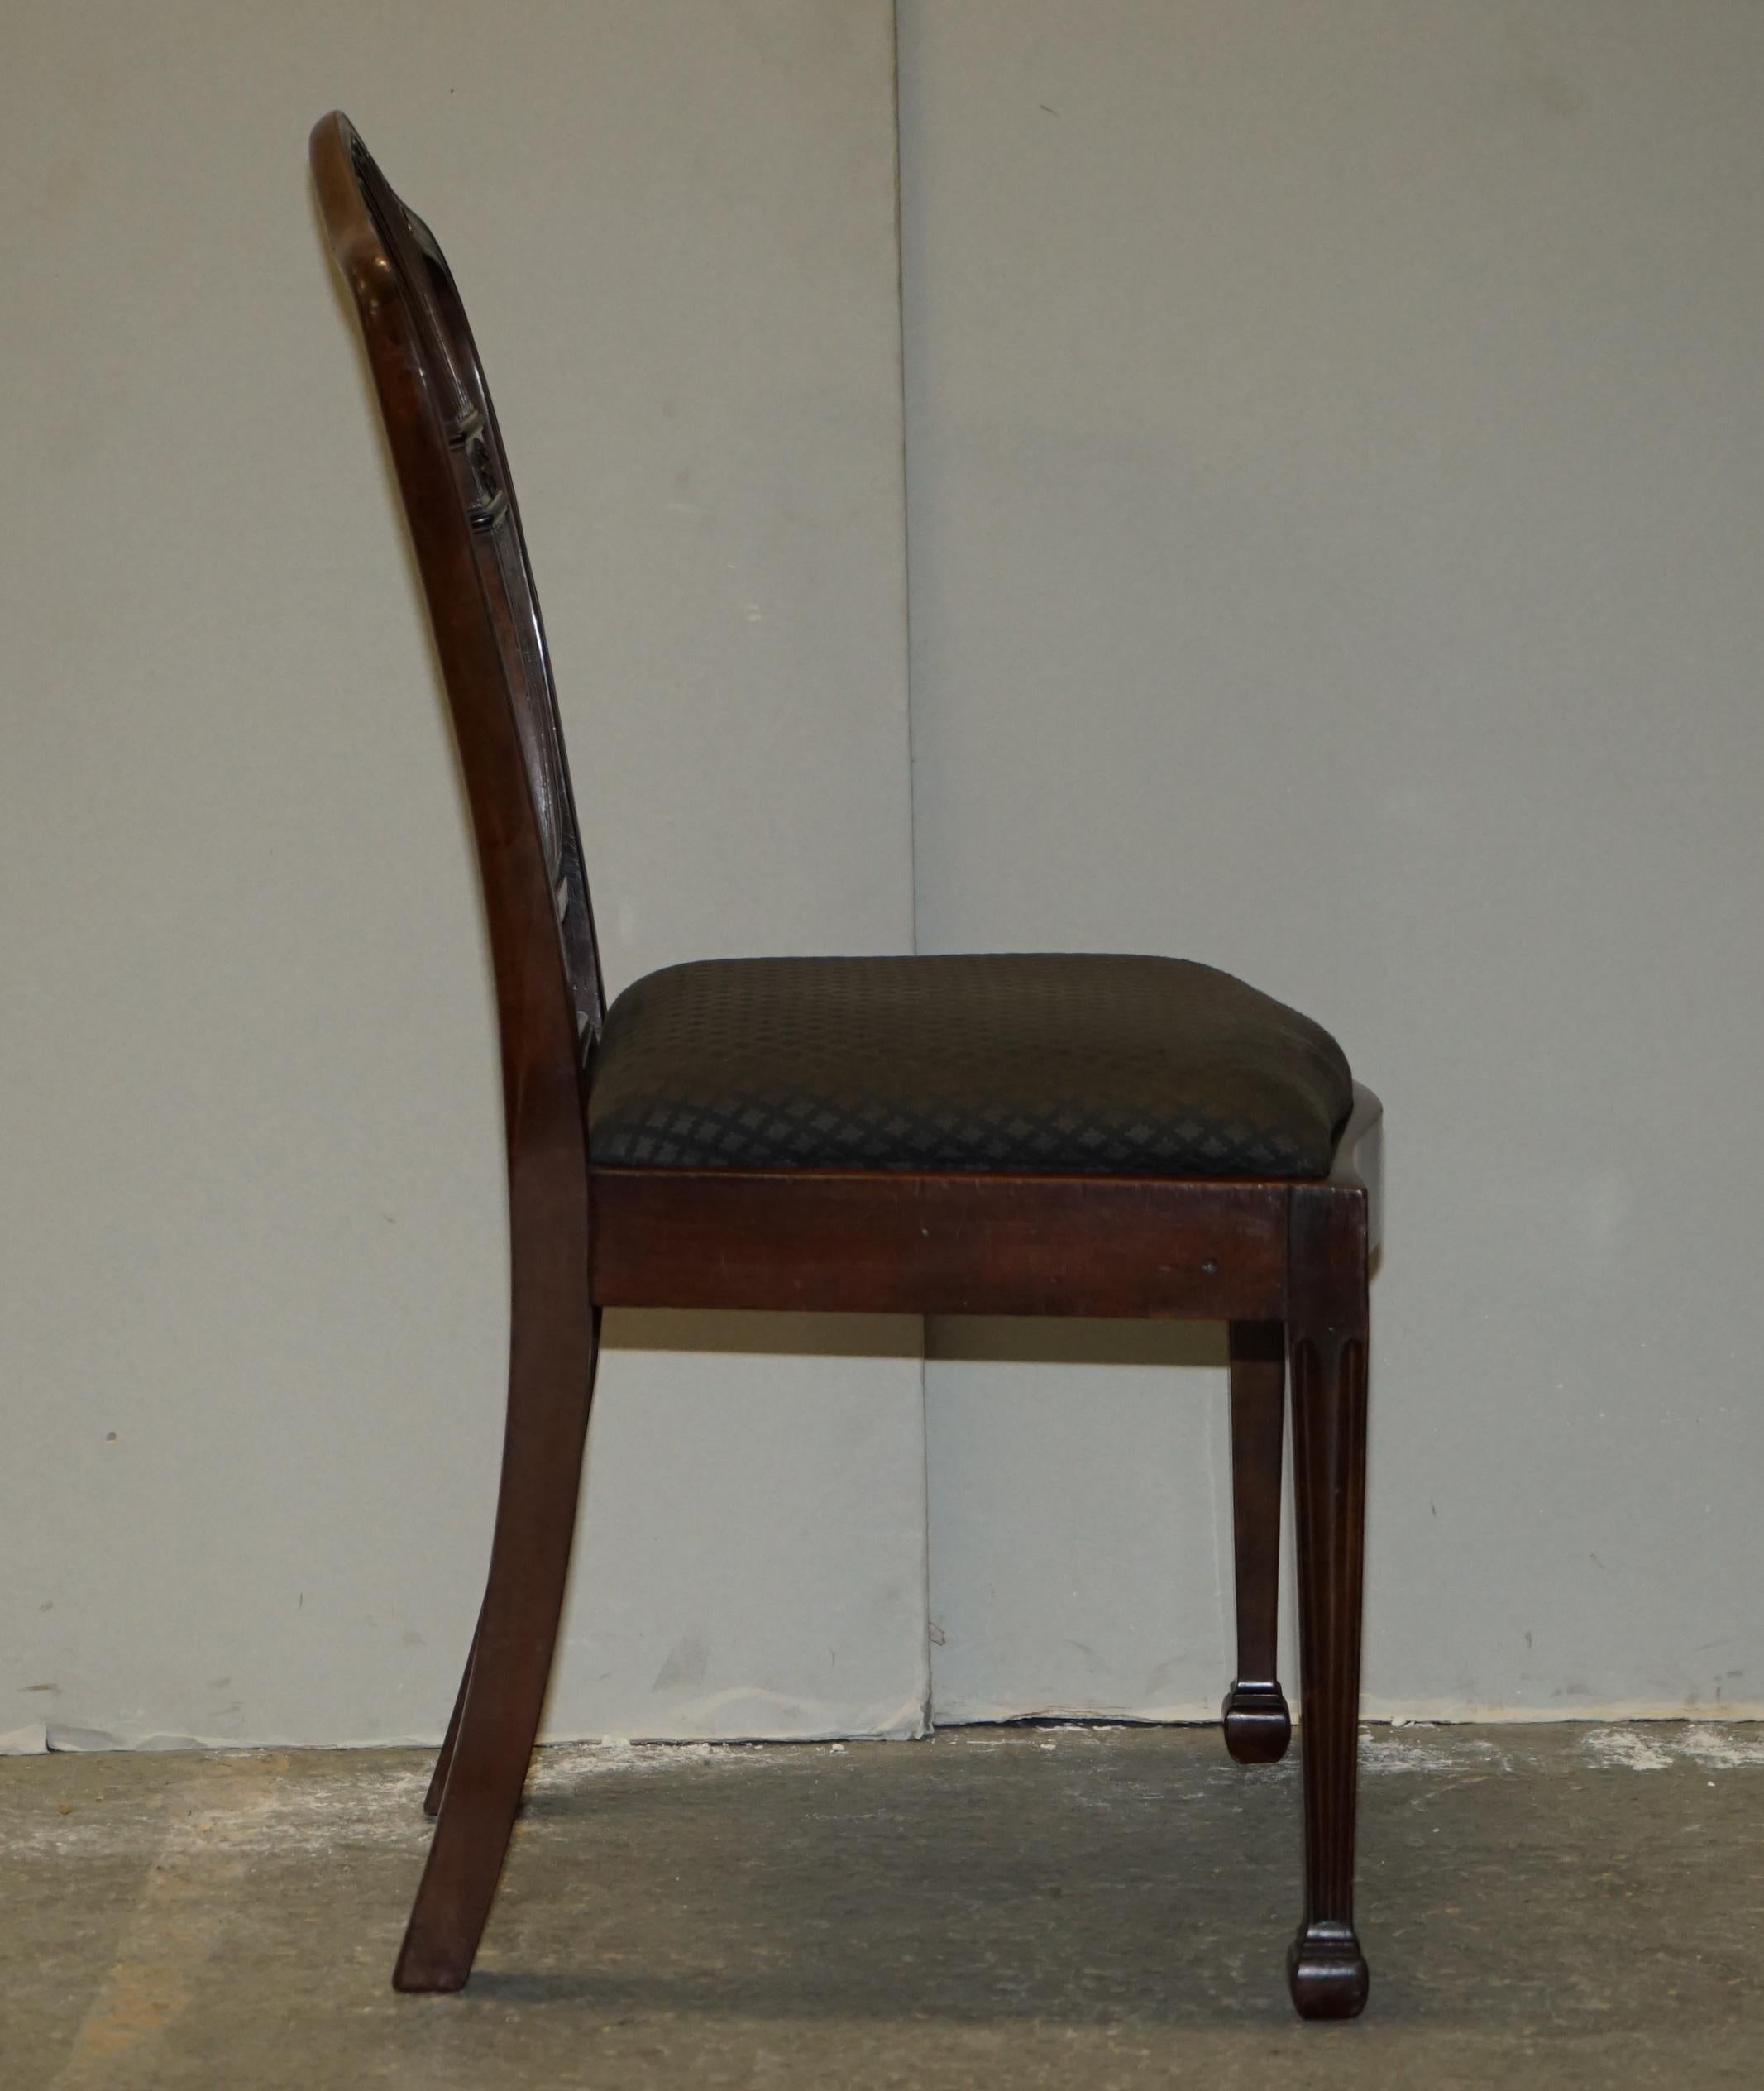 8 Antique George Hepplewhite Style Dining Chairs from Lady Diana's Spencer House For Sale 9